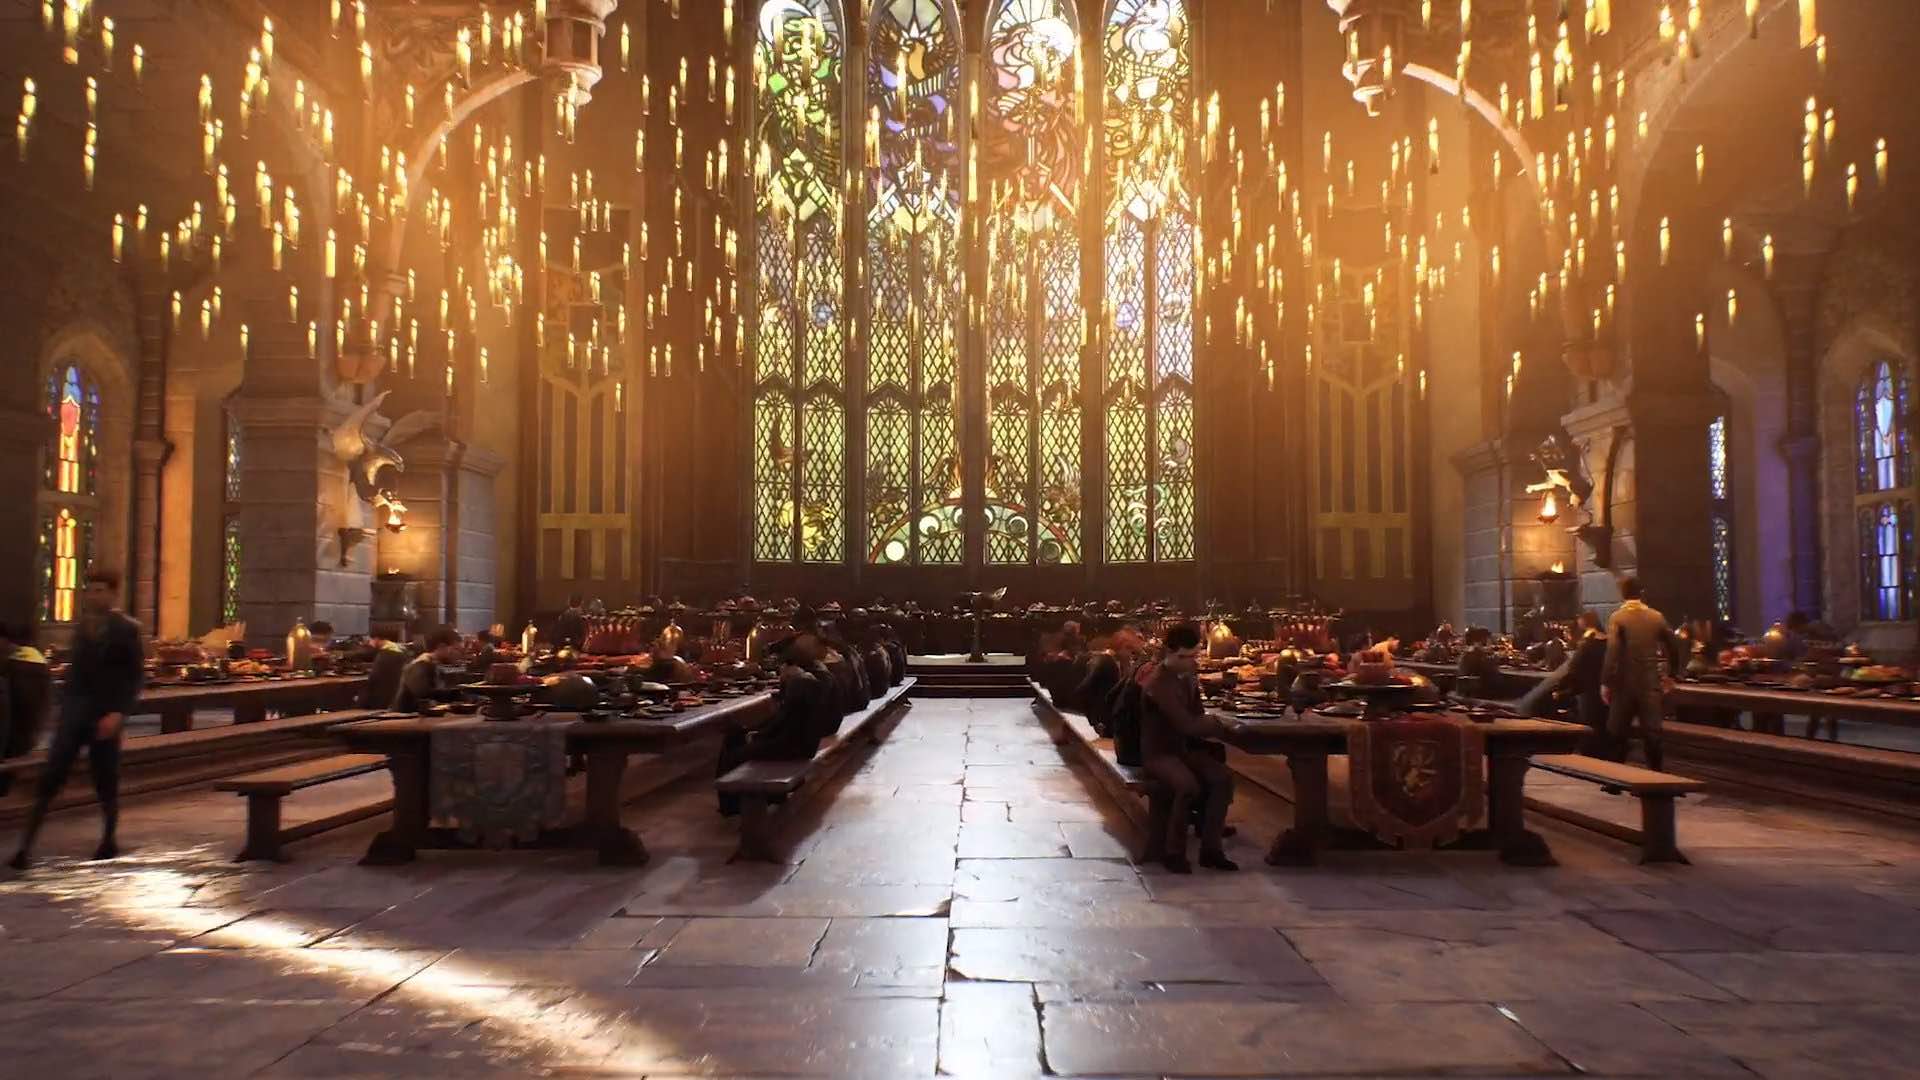 Hogwarts Legacy PS5 Wallpapers